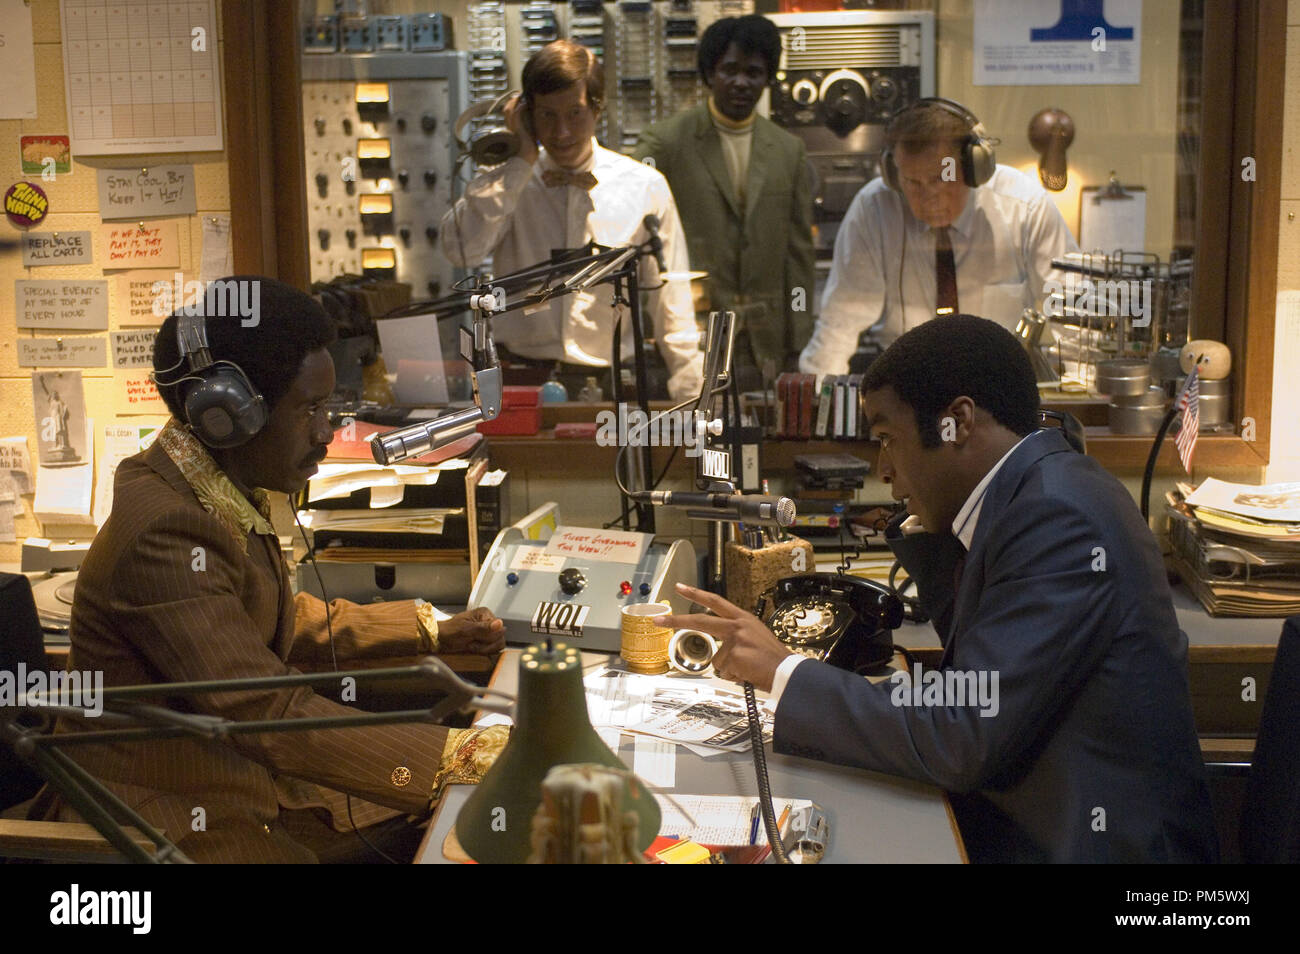 Film Still from 'Talk to Me' Don Cheadle, Martin Sheen, Chiwetel Ejiofor © 2007 Focus Features Photo credit: Michael Gibson   File Reference # 30738115THA  For Editorial Use Only -  All Rights Reserved Stock Photo